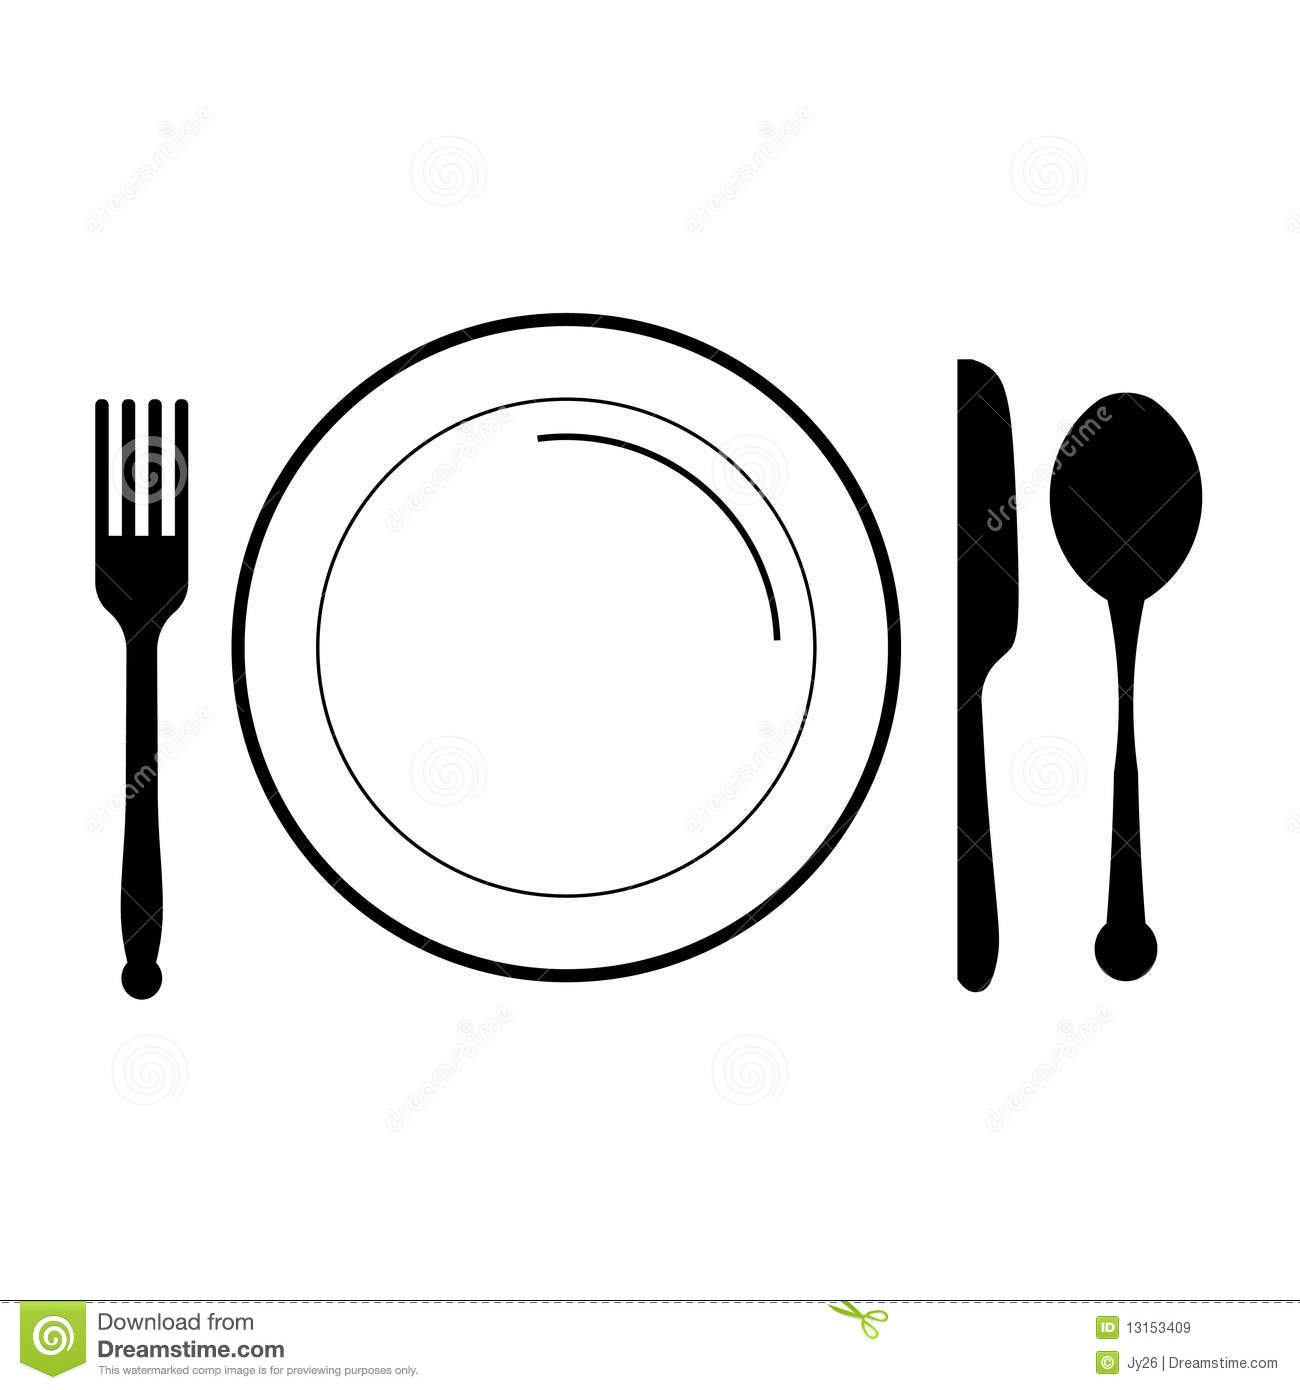 Plate With Fork Knife Spoon Royalty Free Stock Images   Image